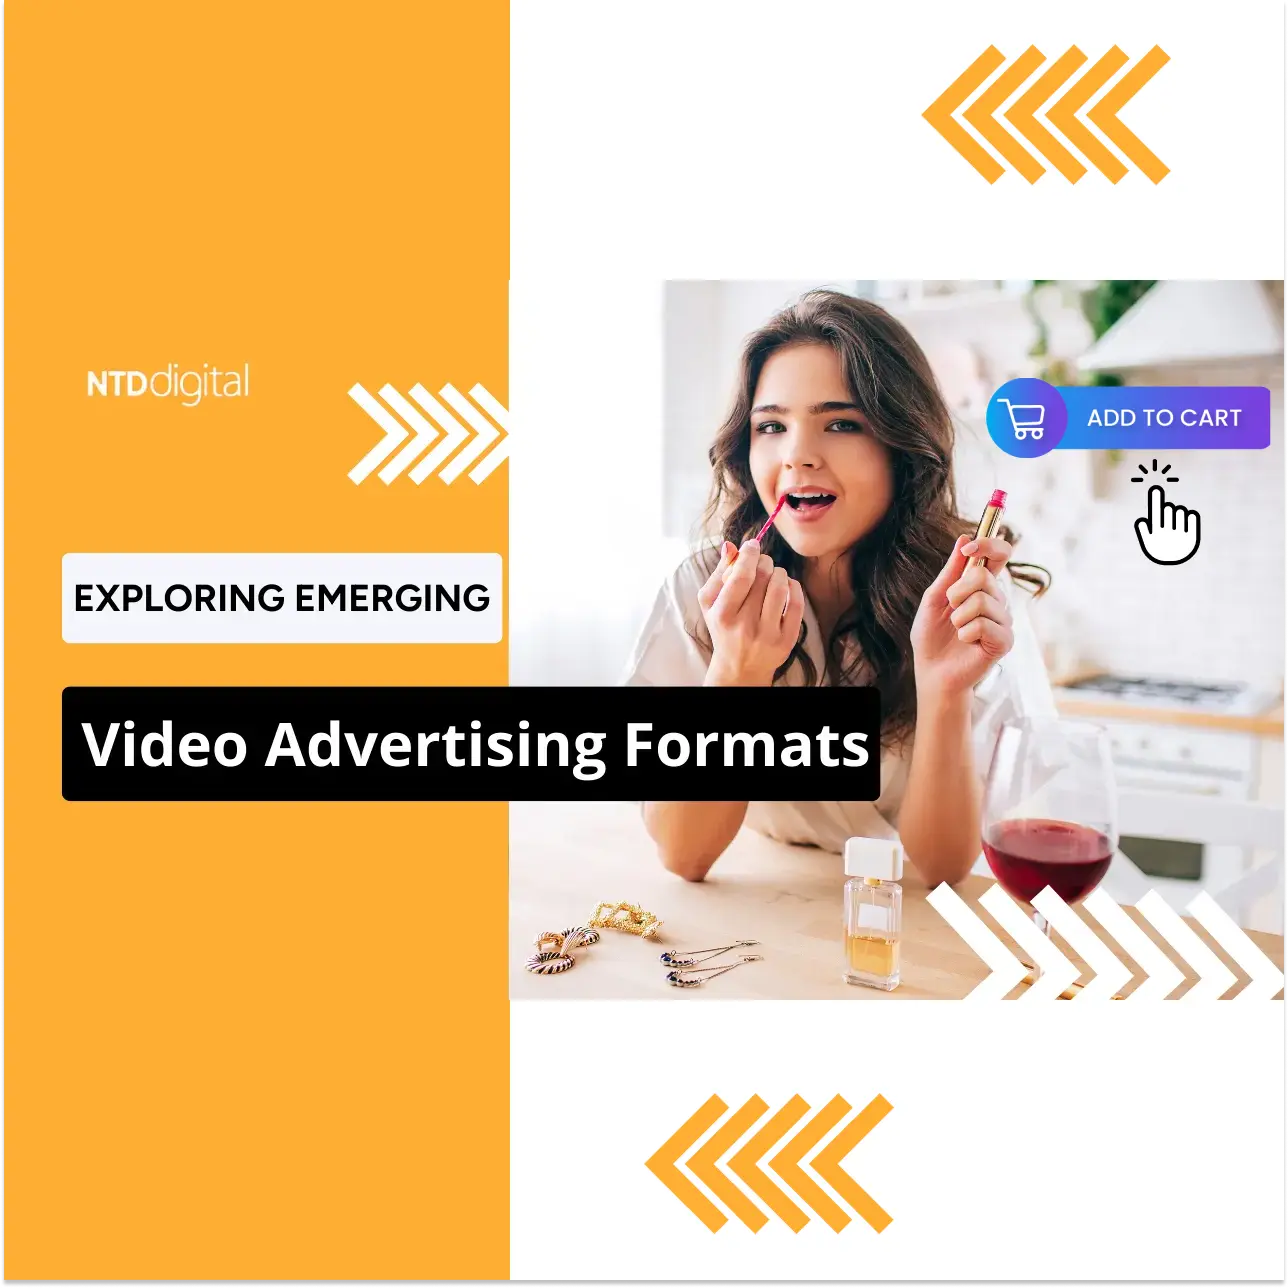 Emerging Video Advertising Formats: Shoppable Videos, Interactive Ads, and Vertical Video for Mobile